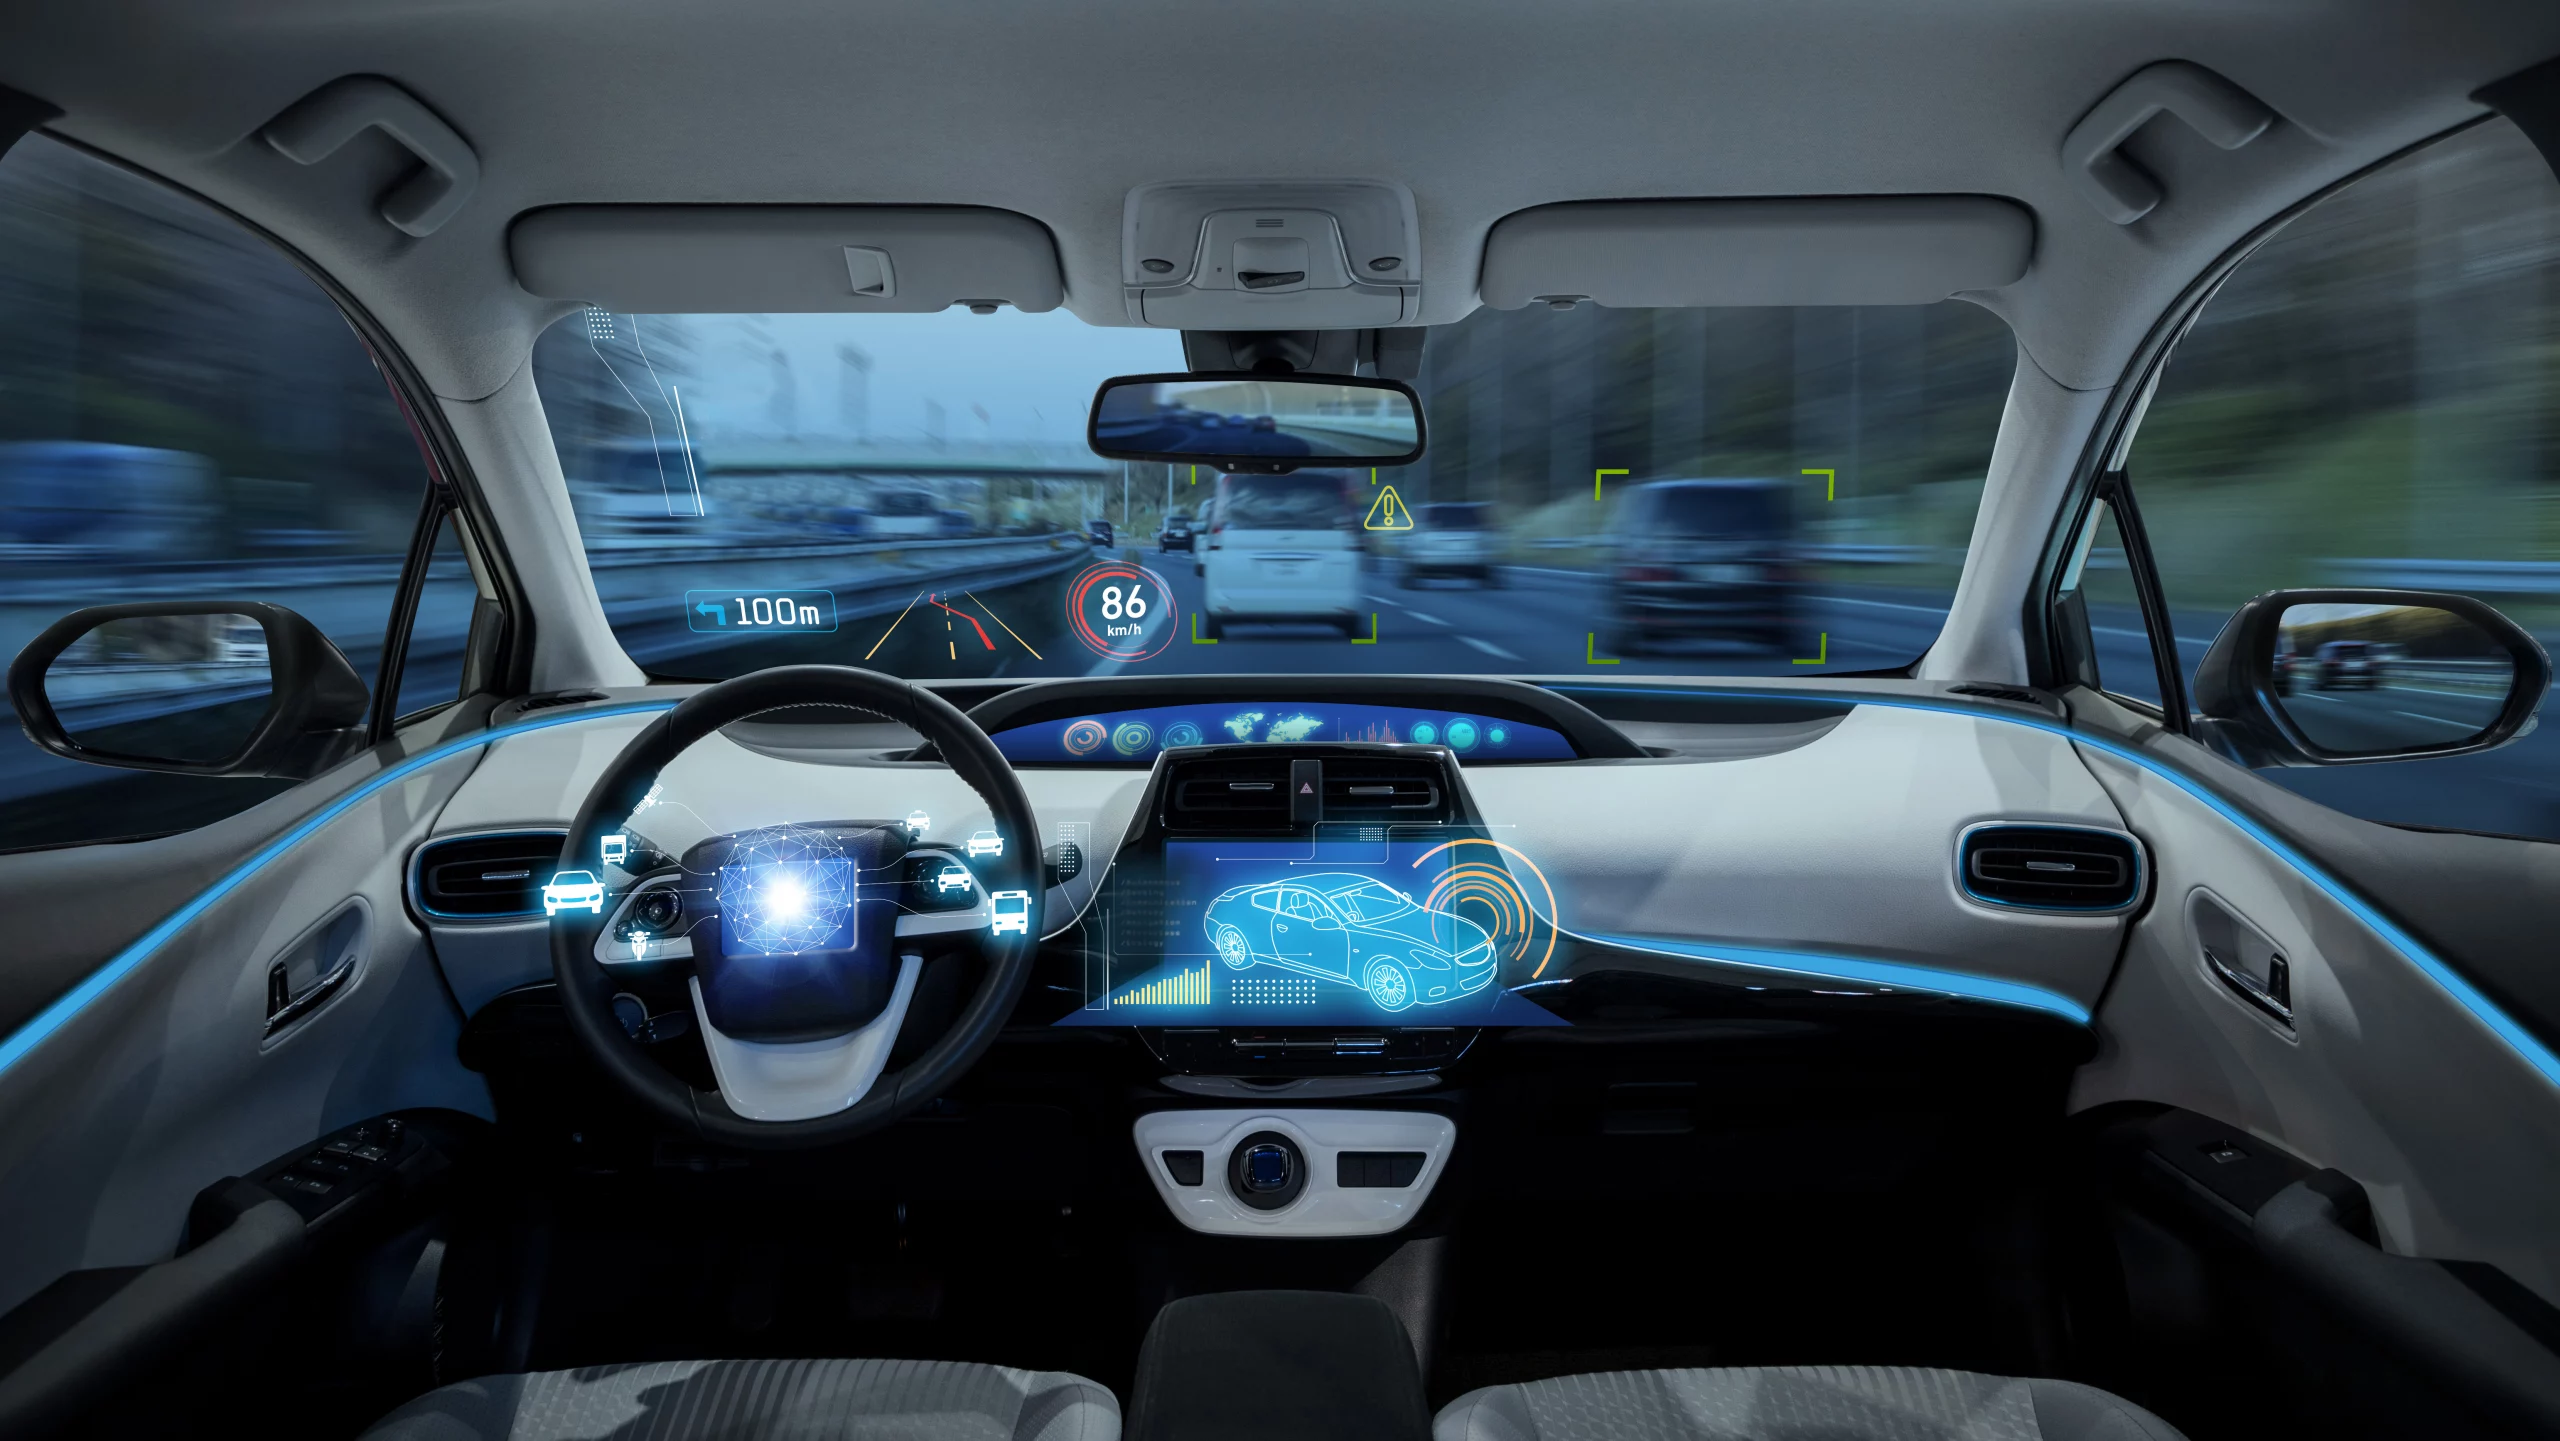 Concept of inside a self driving car